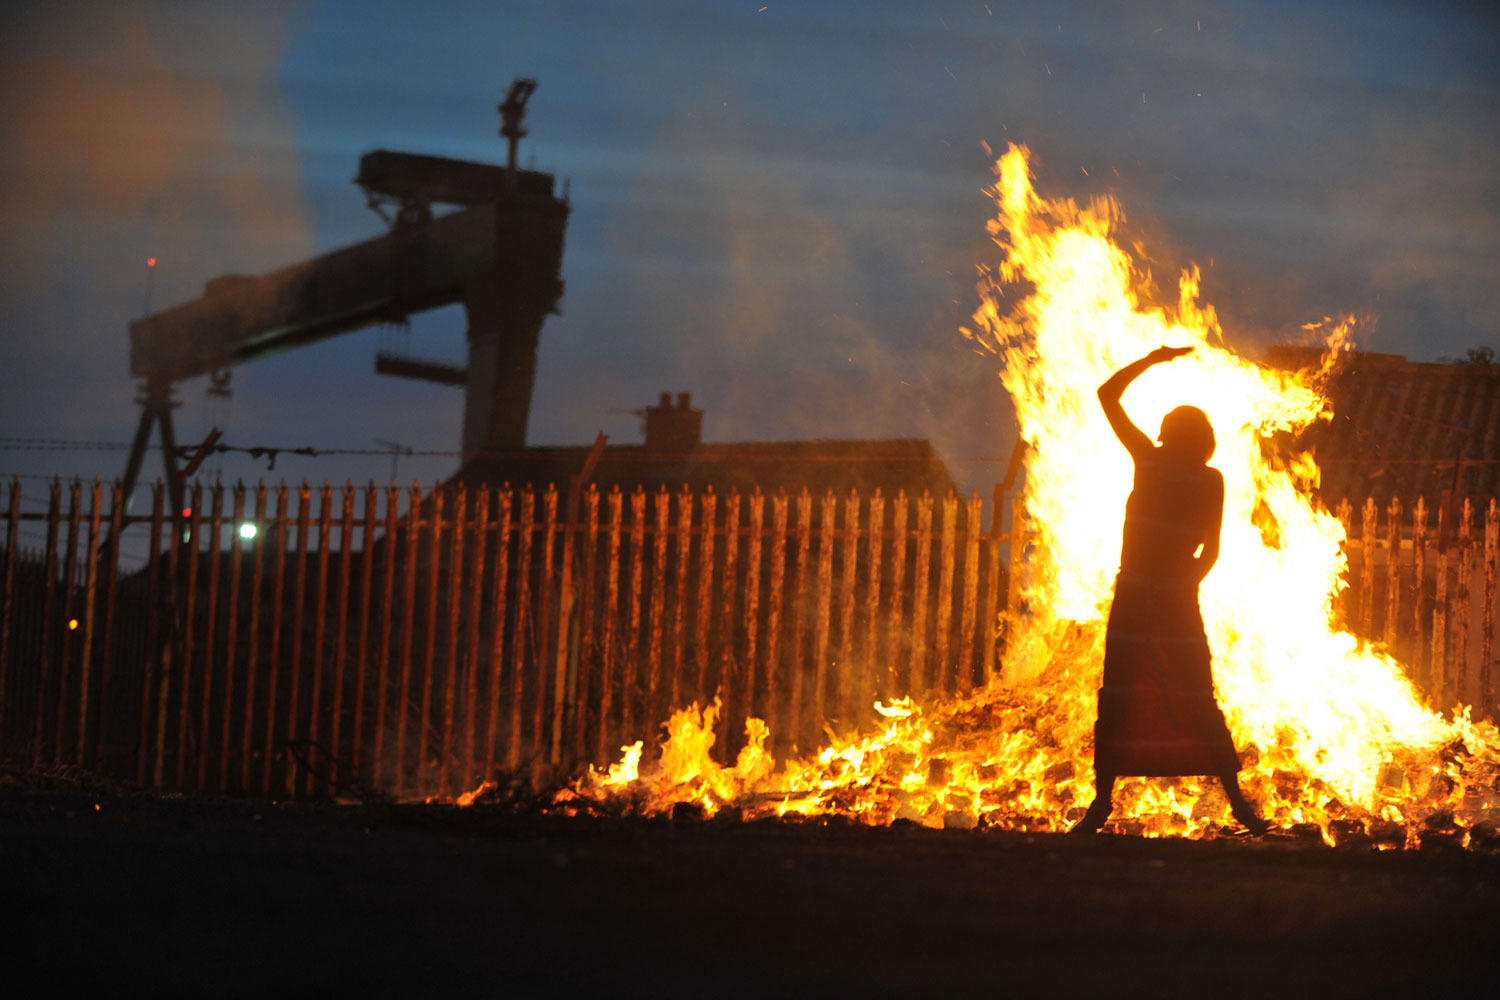 July 11, 2011. Children play around a bonfire lit in the shadow of a shipyard to celebrate the start of the loyalist Twelfth of July Celebrations in Belfast, Northern Ireland. Bonfires are traditionally lit in protestant areas on the 11th of July to mark the start of the Twelfth Celebrations. The cranes in the distance are in the Harland and Wolfe shipyard where the Titanic was built.